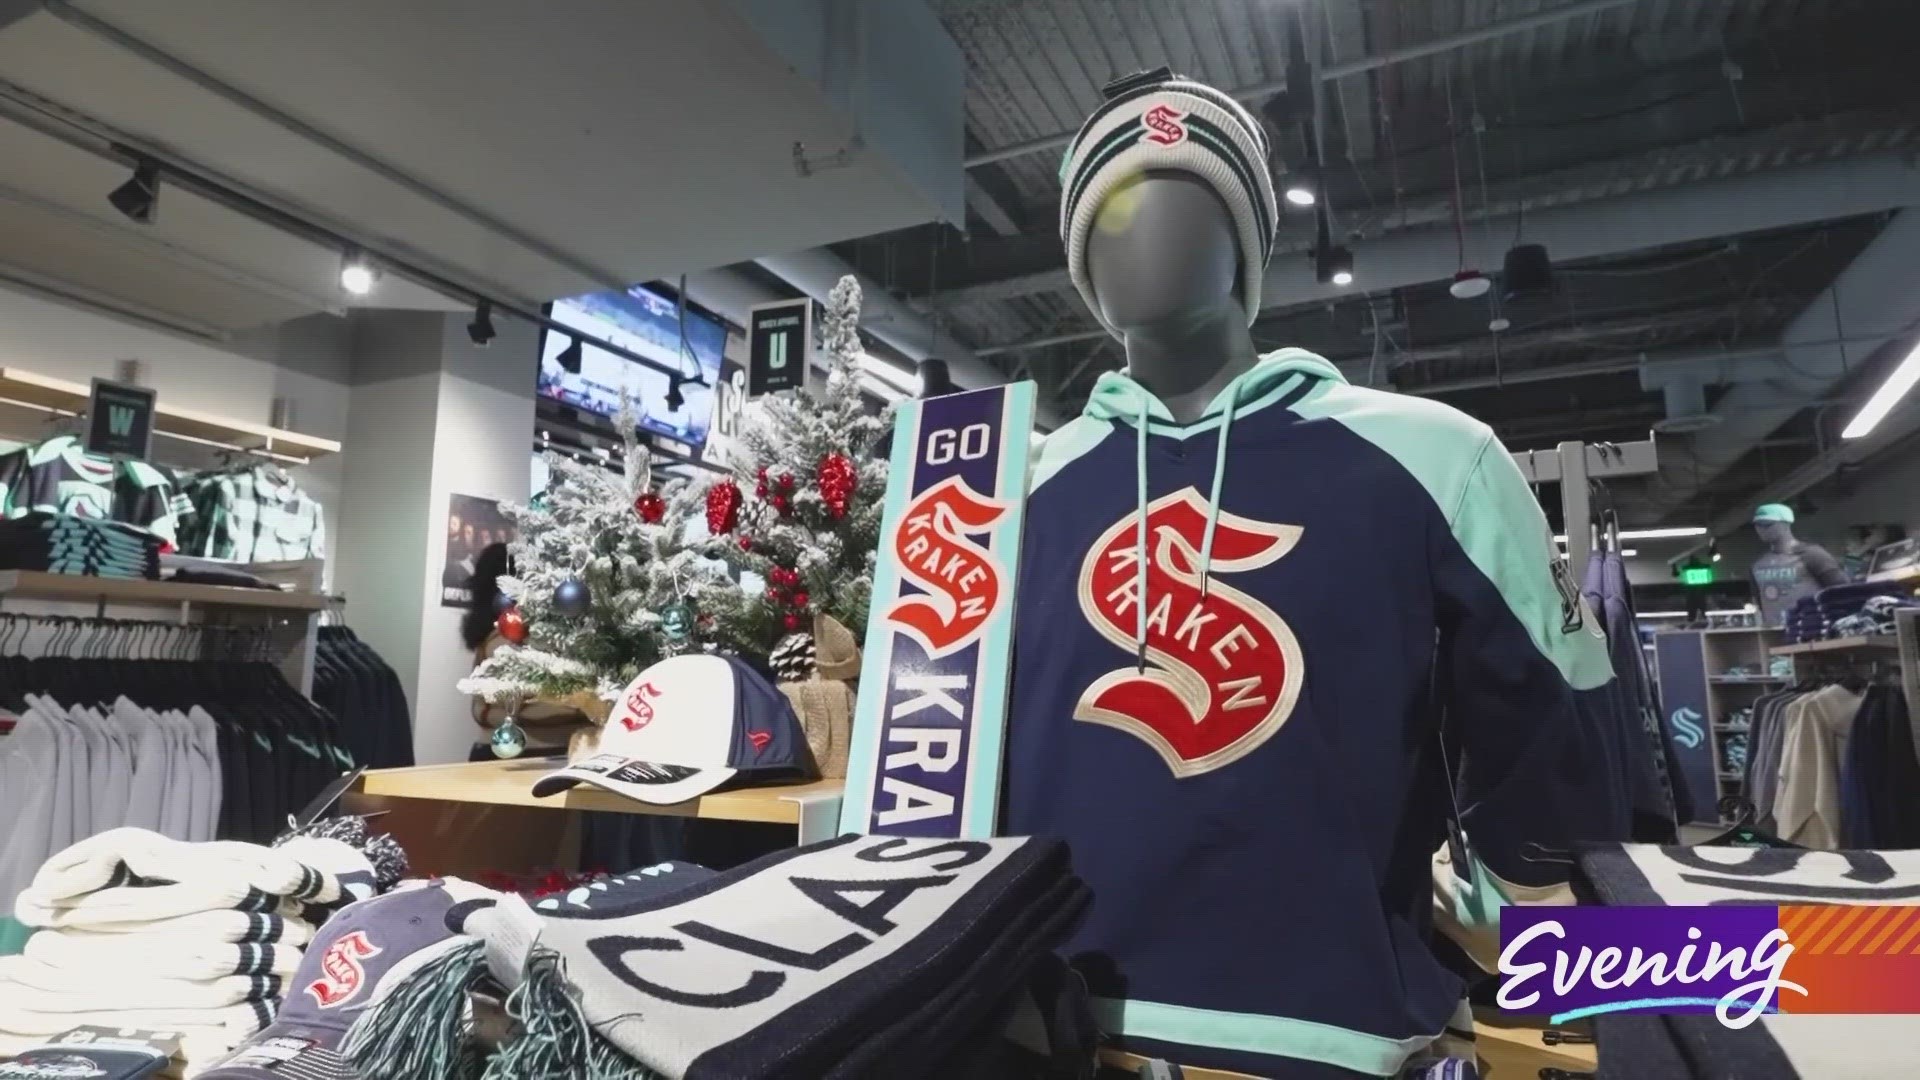 Jose visits the Seattle Kraken Team Store at the Community Iceplex with holida gift recommendations for fans